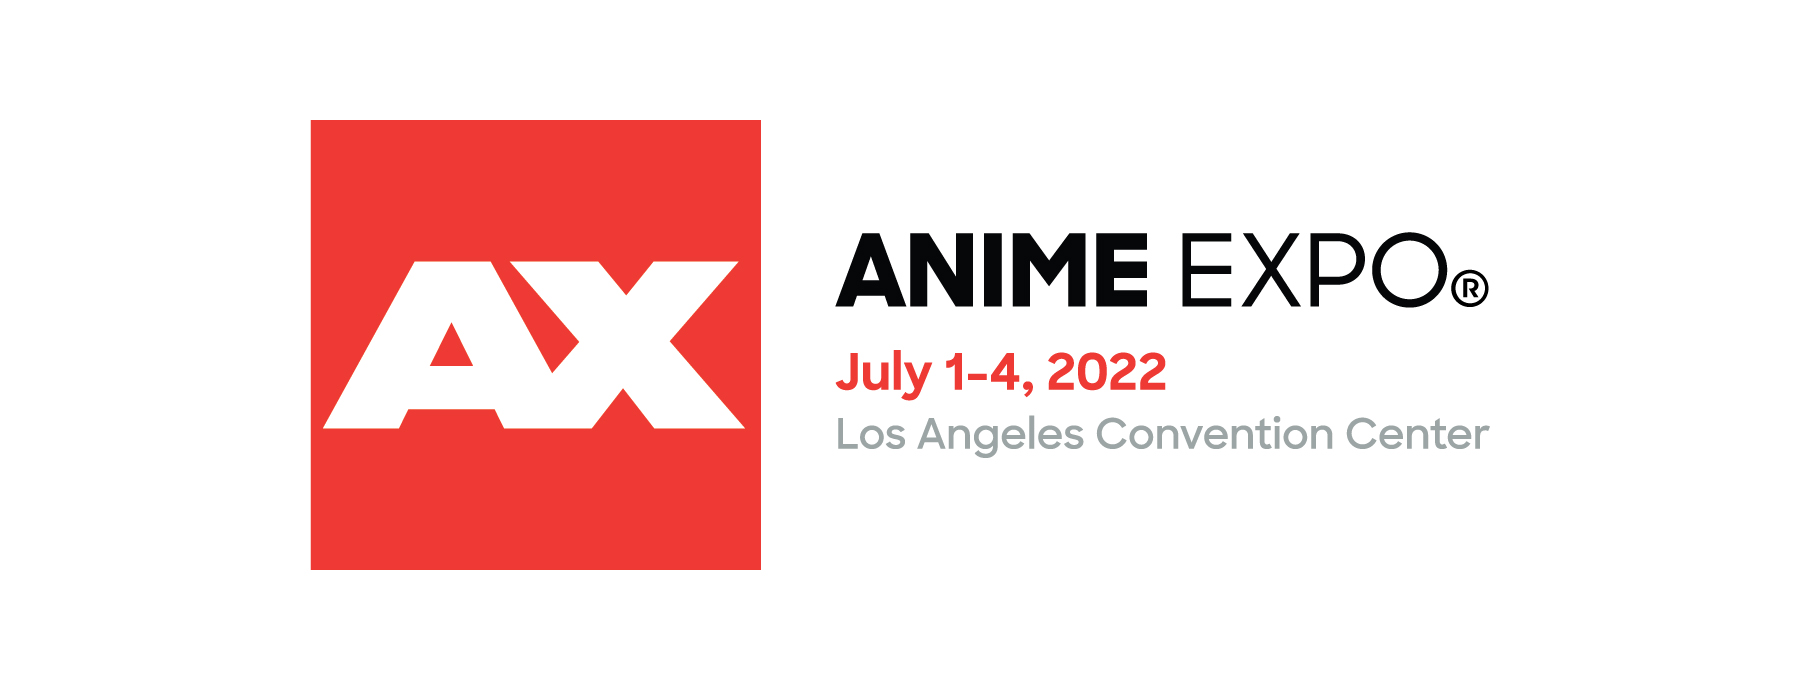 What to Watch For: Toonami Related Panels to Check Out at Anime Expo 2022